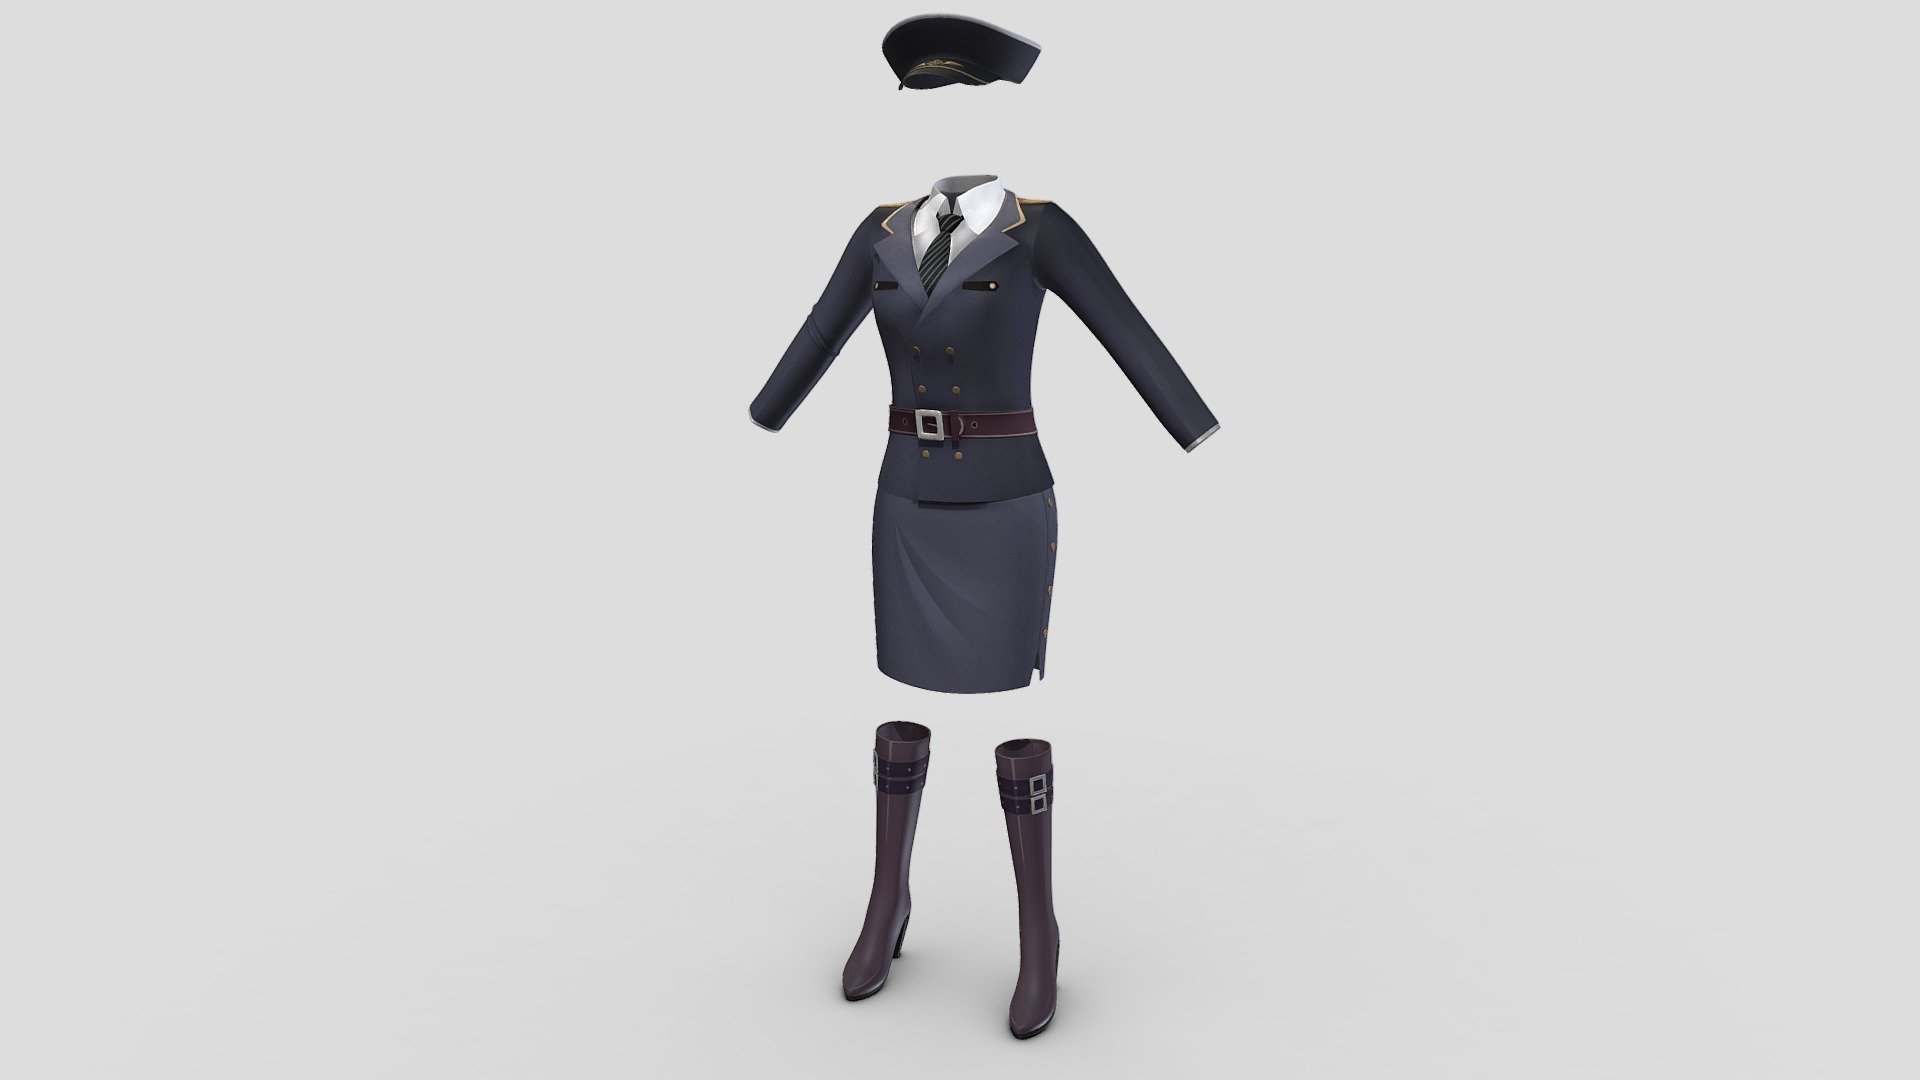 Uniform + Boots + Cap

Can fit to any character

Ready for games

Clean topology

No overlapping unwrapped UVs

High quality realistic textues

FBX, OBJ, gITF, USDZ (request other formats)

PBR or Classic

Please ask for any other questions

Type     user:3dia &ldquo;search term